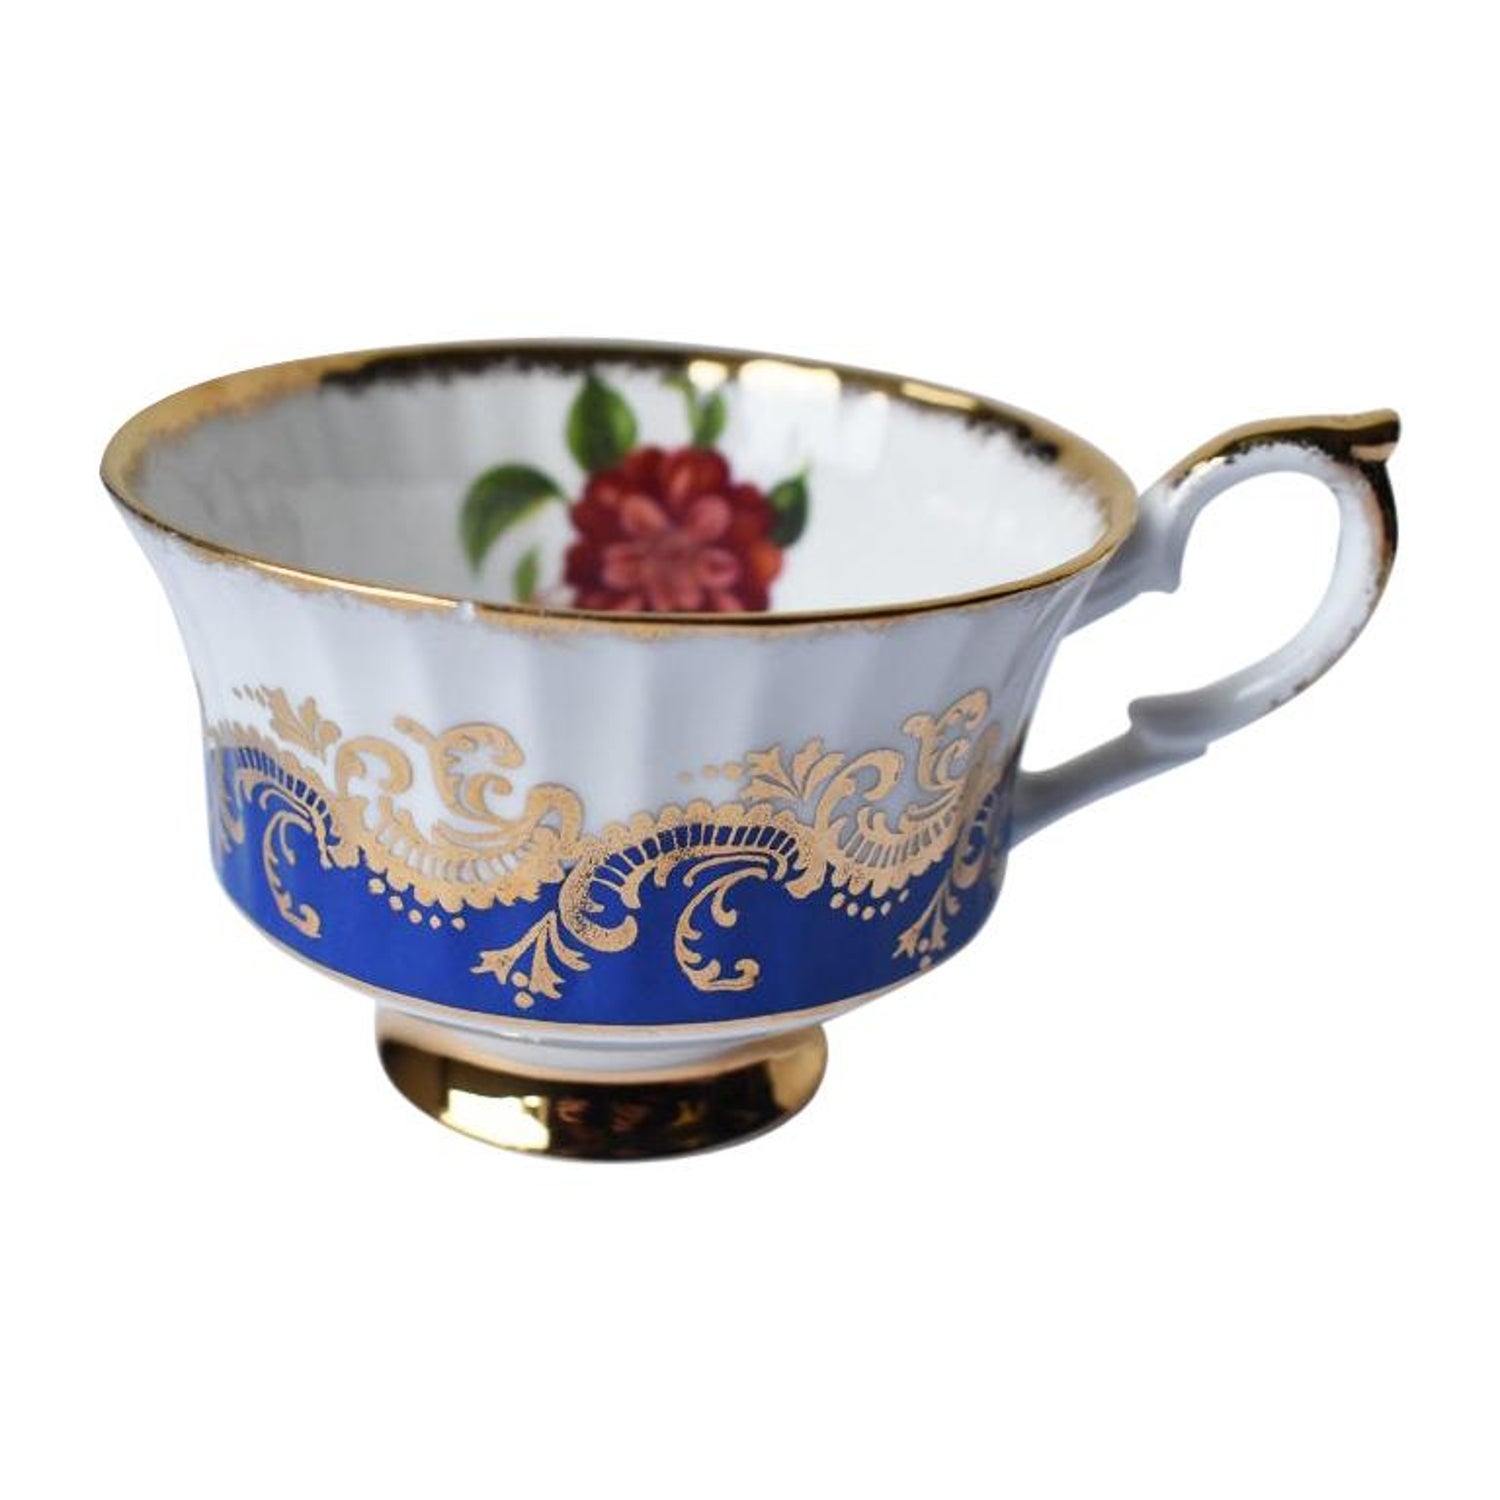 https://a.1stdibscdn.com/porcelain-paragon-tea-cup-with-gold-and-blue-and-hidden-rose-for-her-majesty-for-sale/1121189/f_157317311575015547284/15731731_master.jpg?width=1500